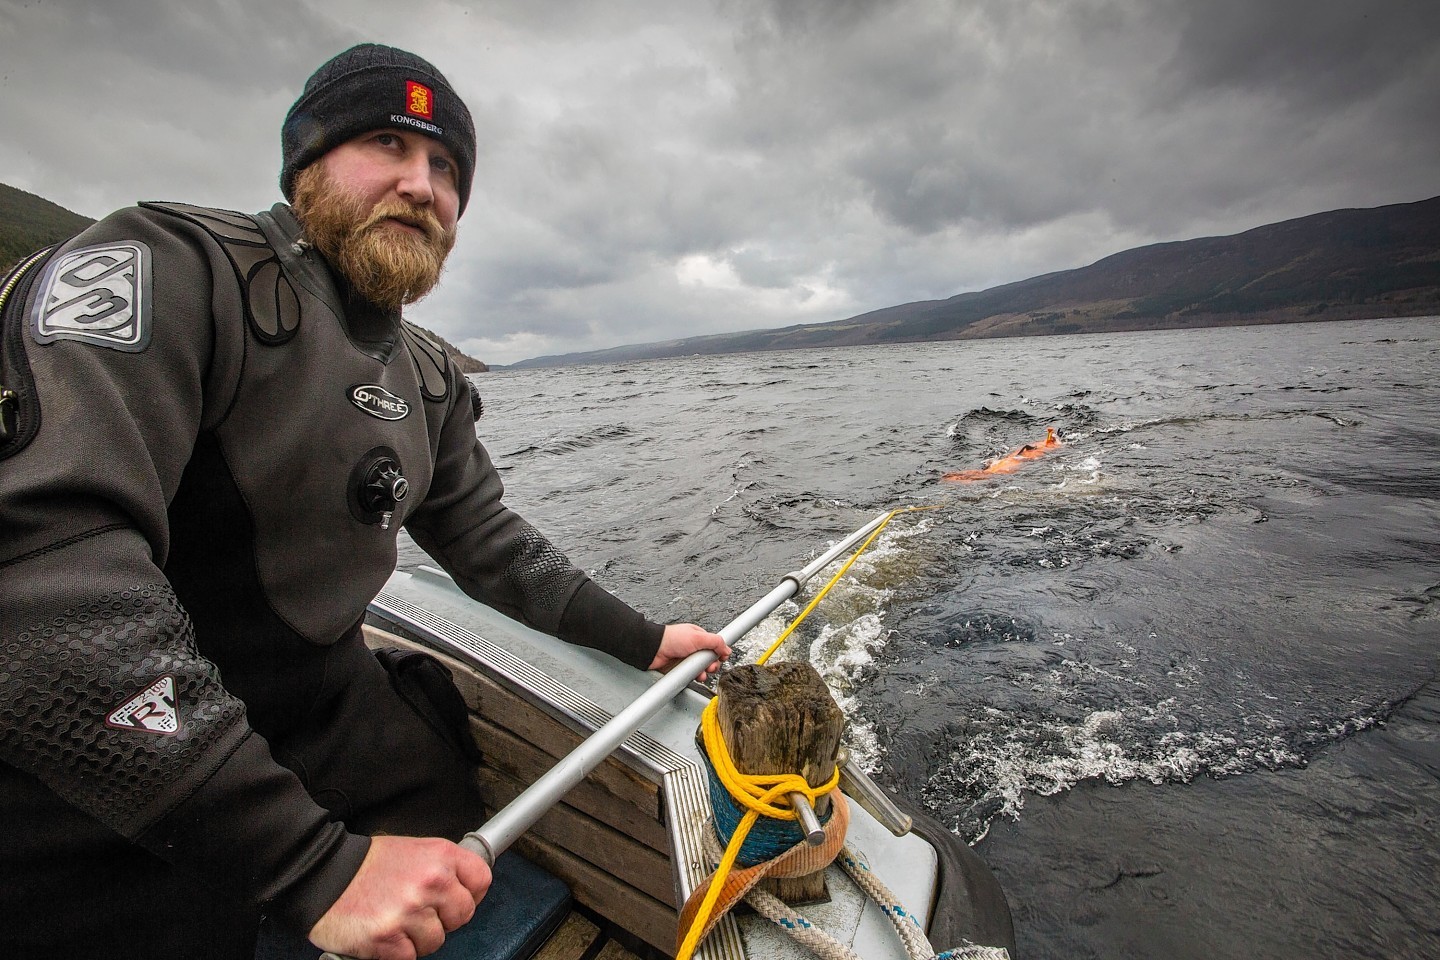 John Haig, Senior Subsea Systems Engineer, launches the Munin at Loch Ness